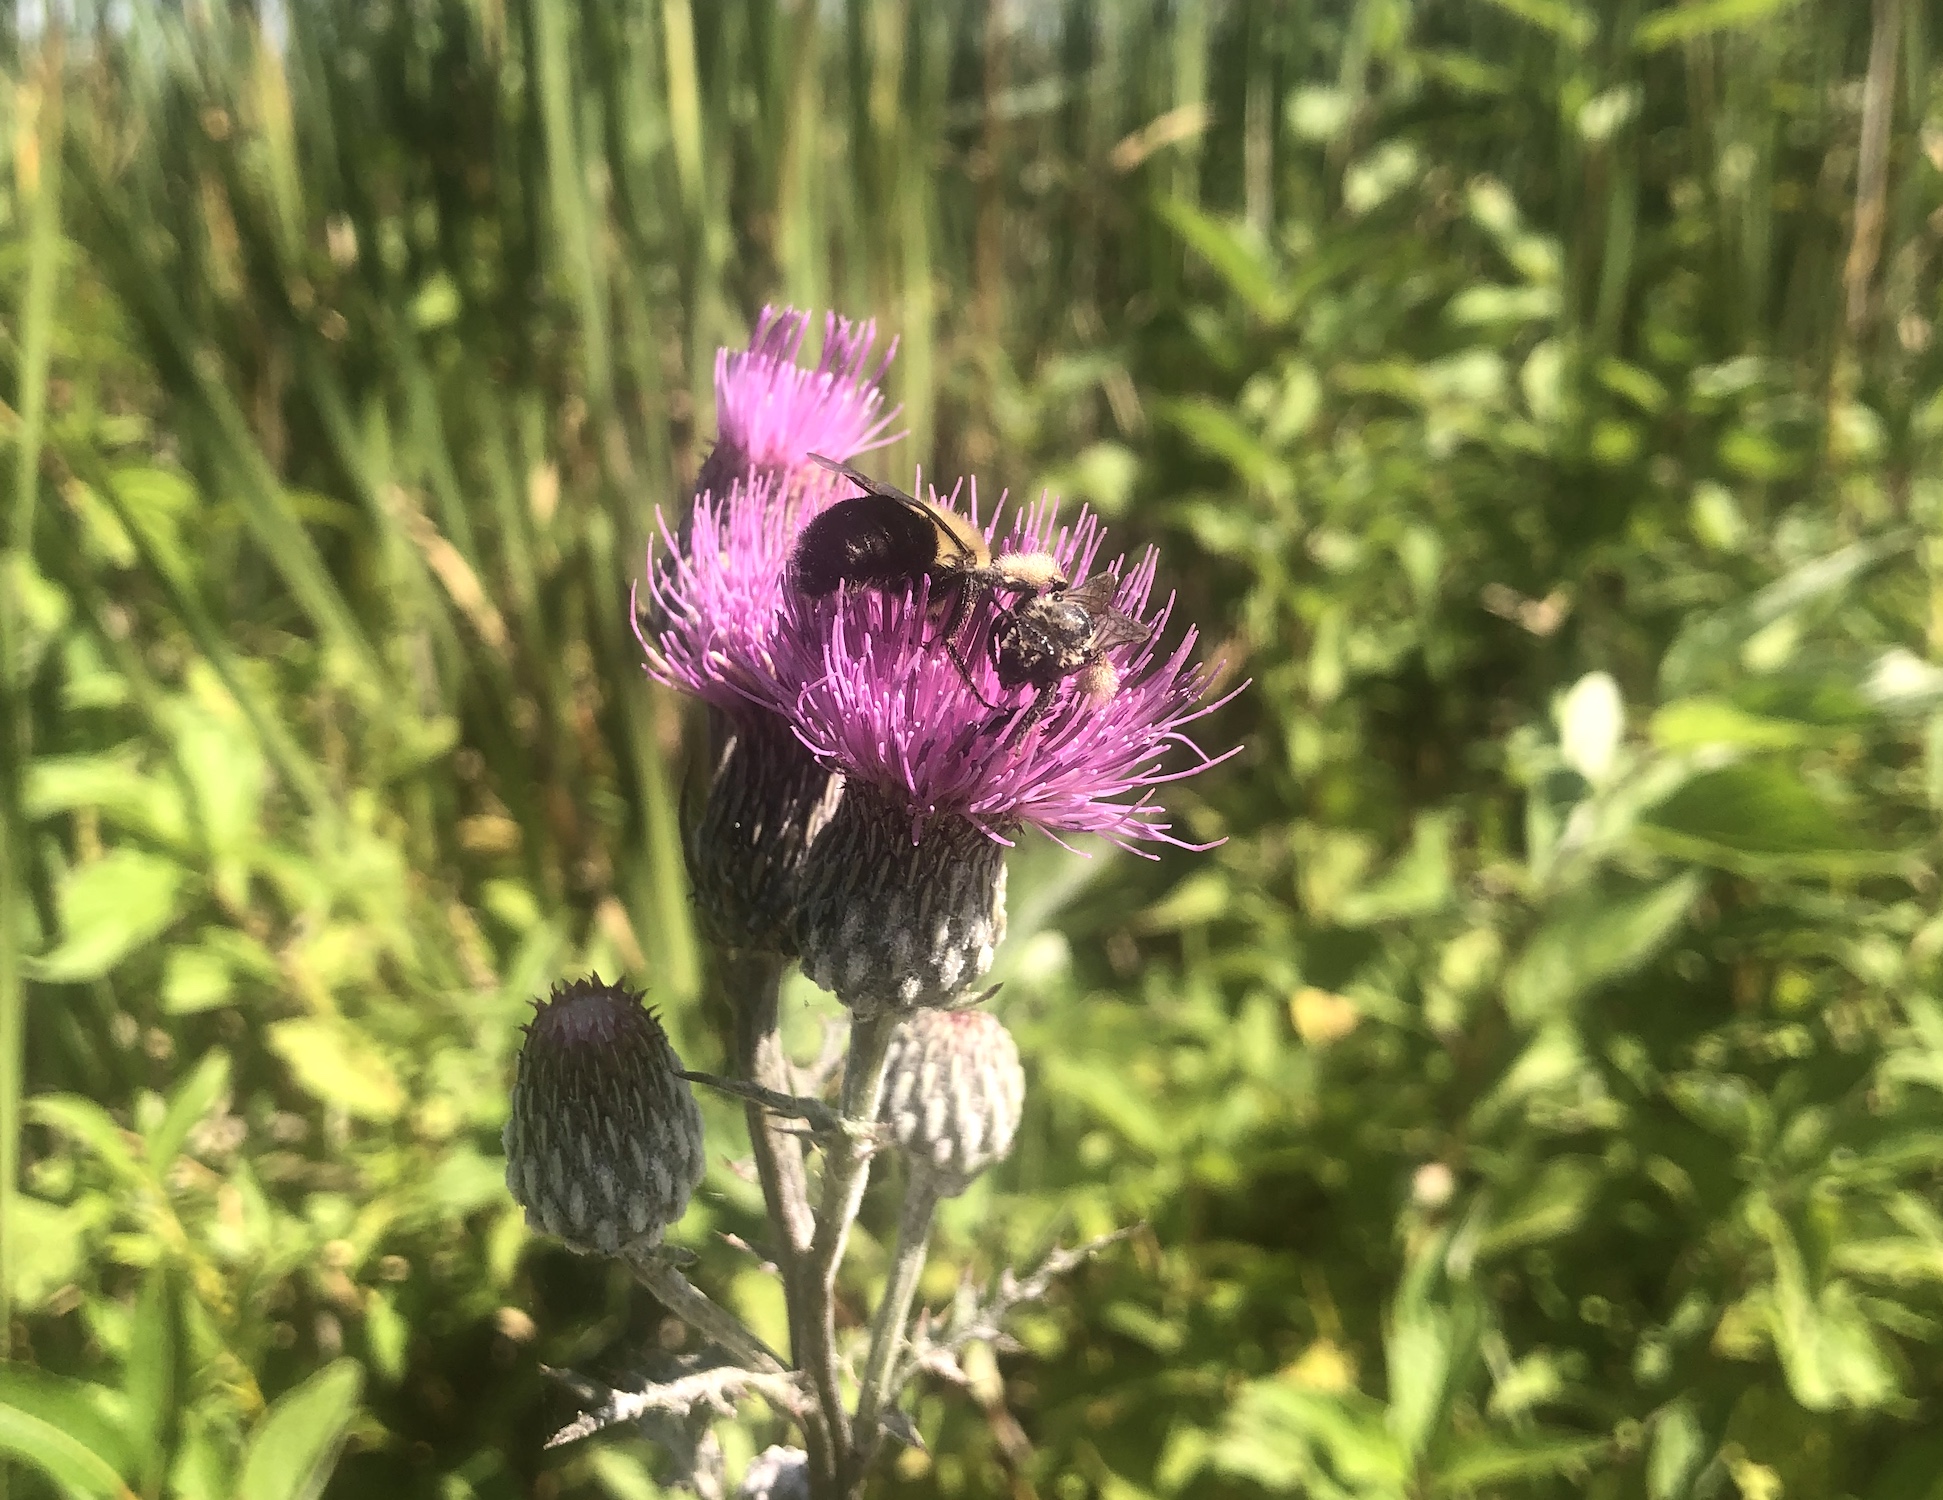 Bee on Swamp Thistle near cattails along shore of Lake Wingra along Arboretum Drive in Madison, Wisconsin on August 17, 2022.